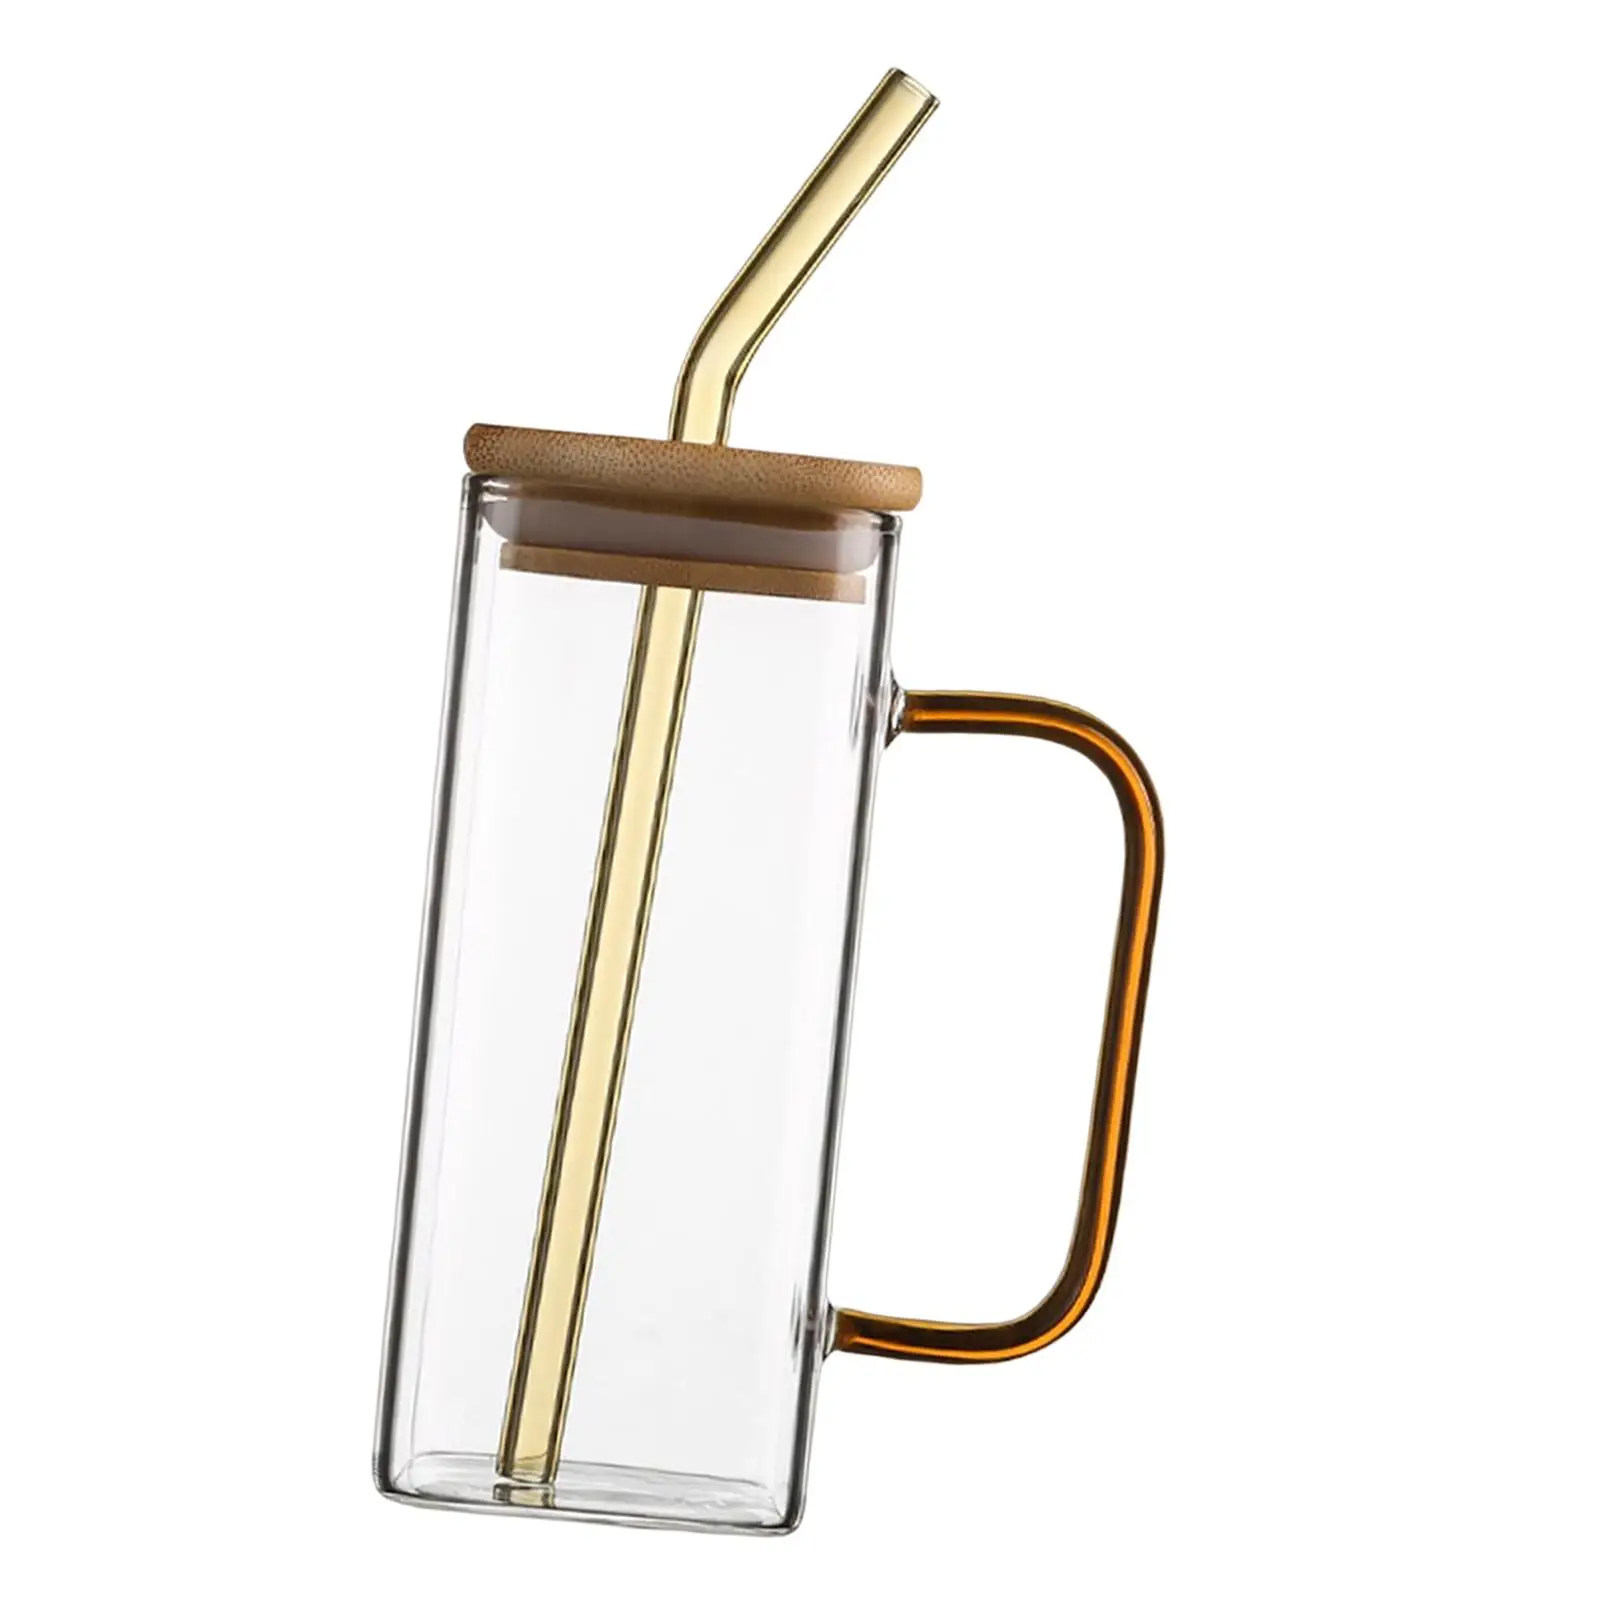 Glass Mug Heat Resistant Reusable Drinking Glass Bottle square Cup for Kids and Adults Iced Coffee Beverage Juice